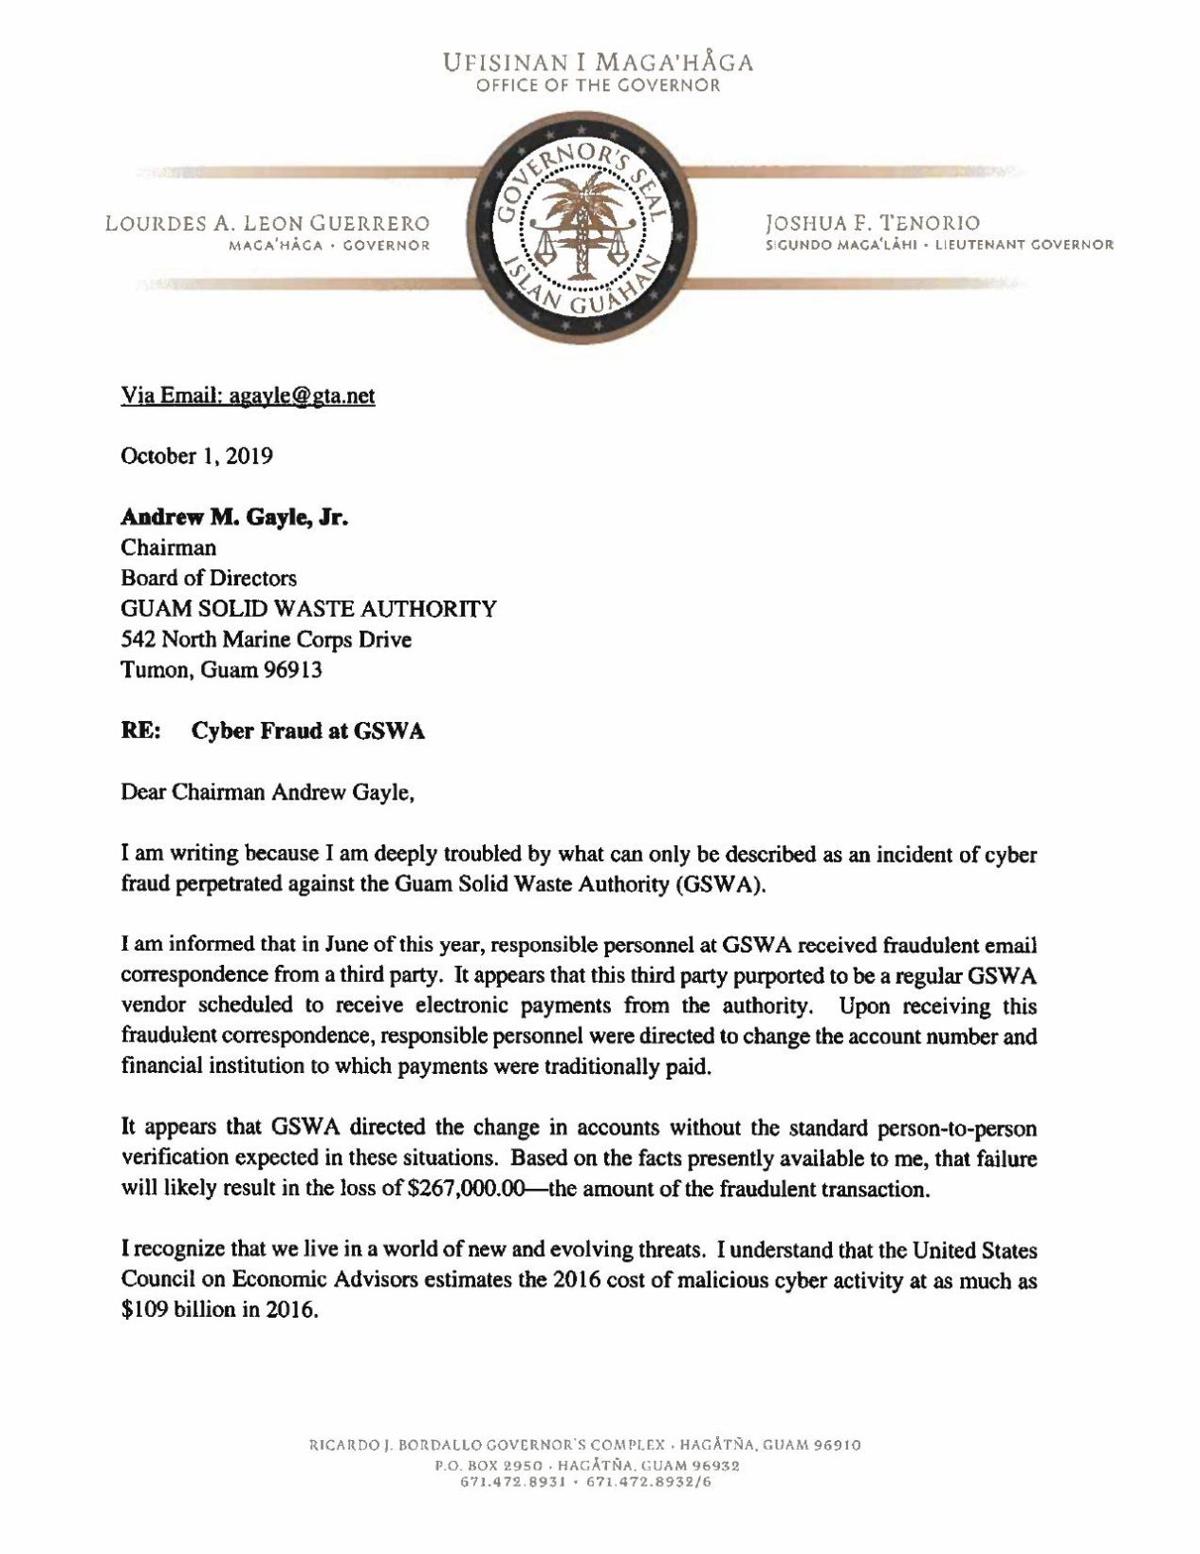 Governor letter to GSWA board chairman Andy Gayle   postguam.com